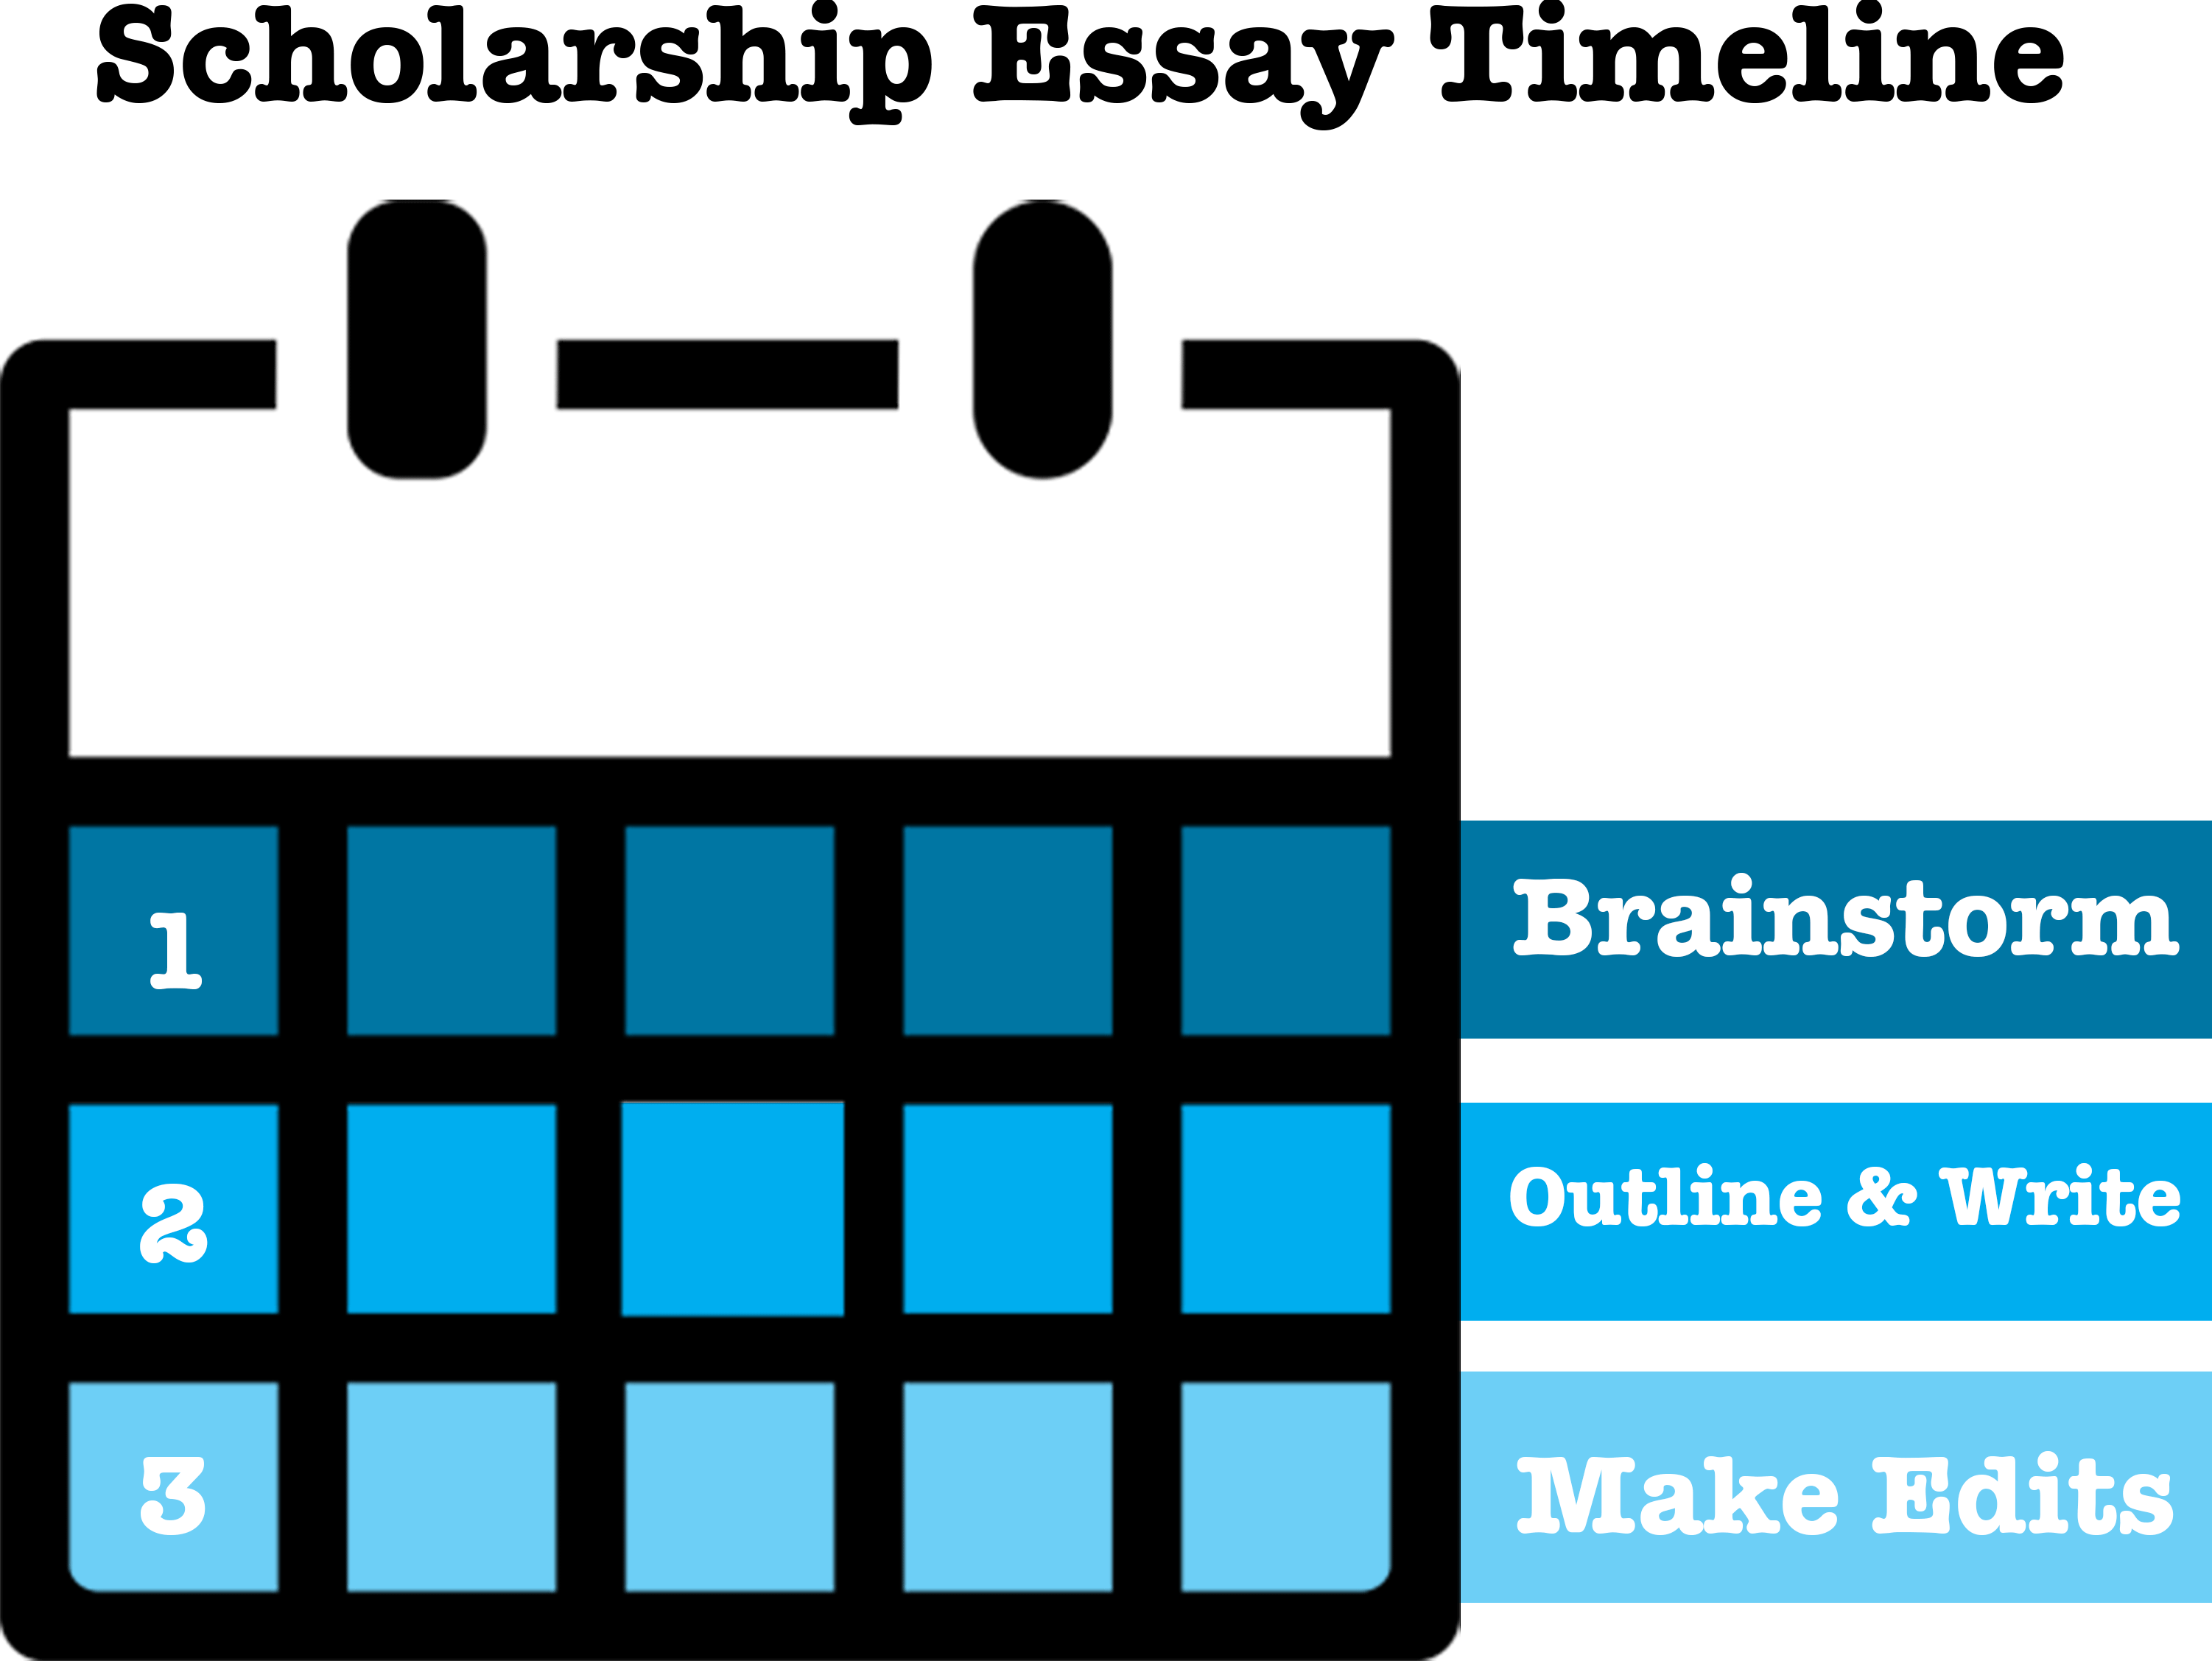 Tips on writing essay for scholarships